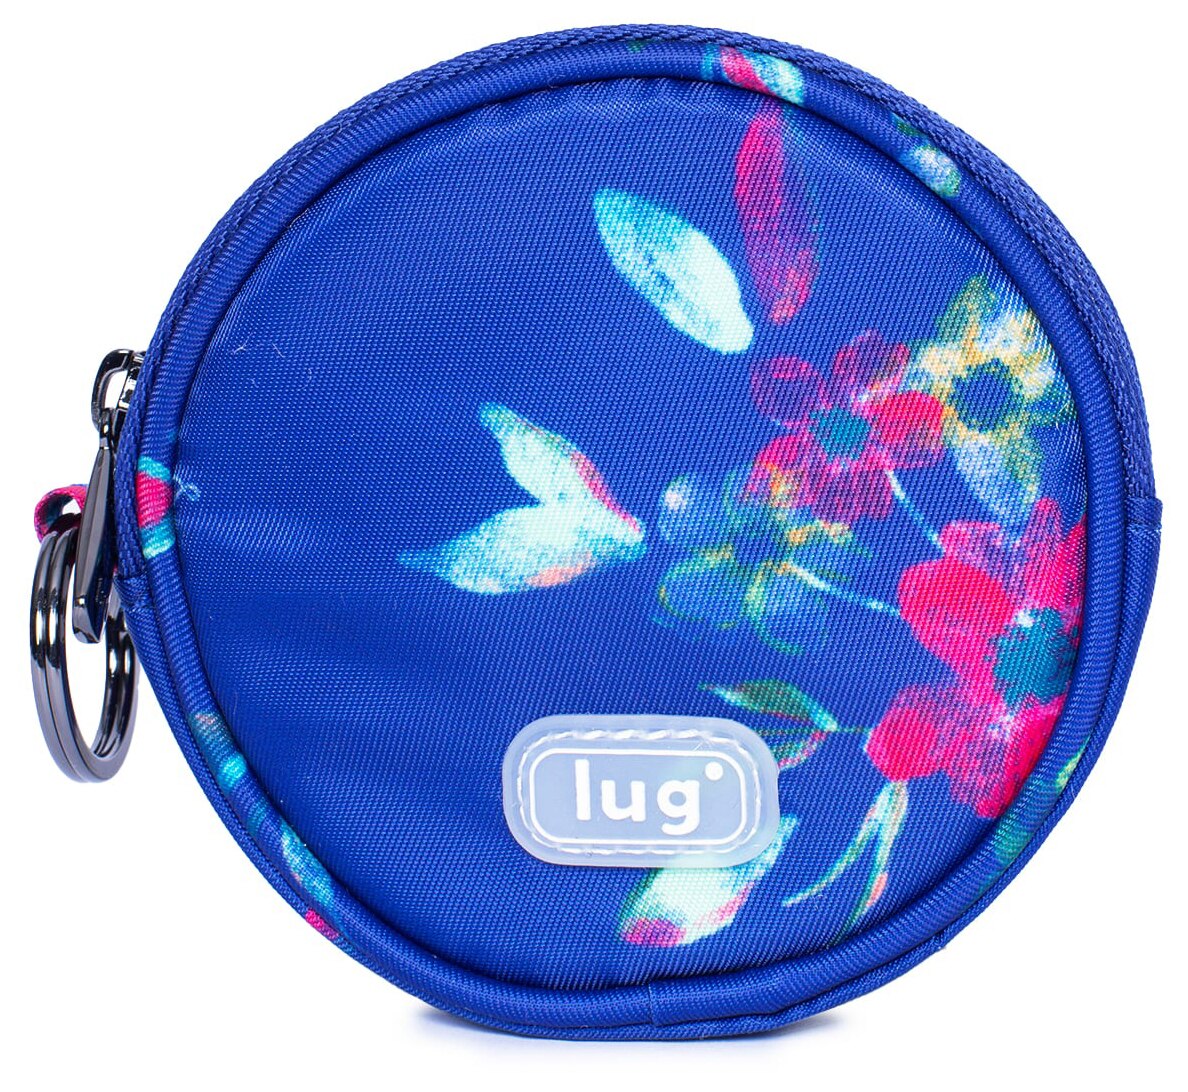 Coin purse - Just Bags Luggage Center